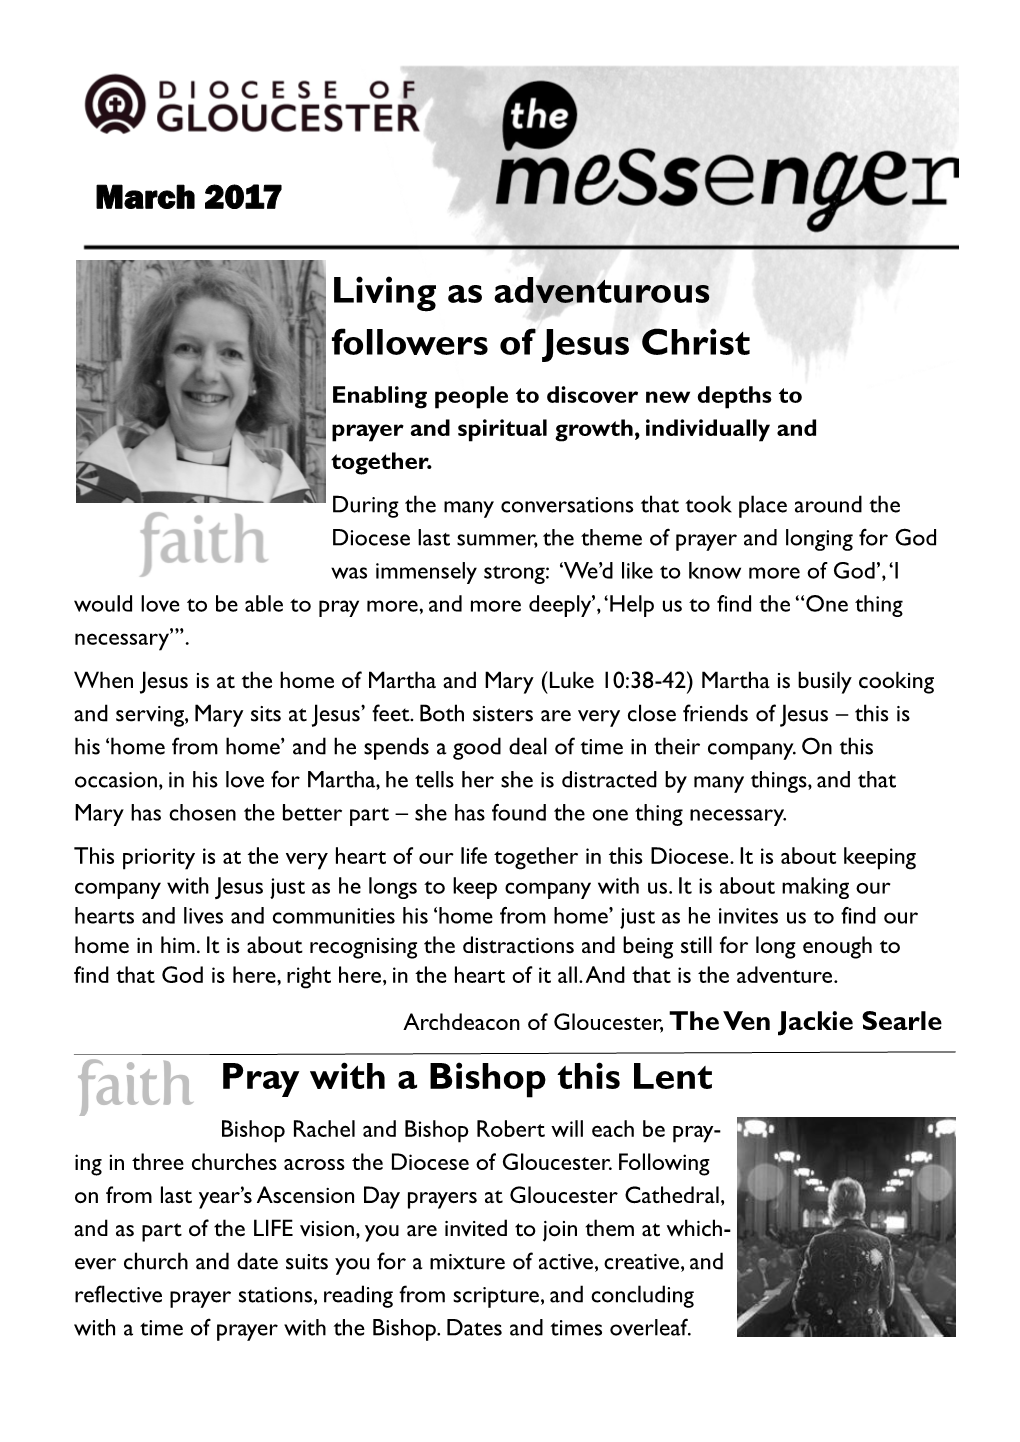 Living As Adventurous Followers of Jesus Christ Pray with a Bishop This Lent